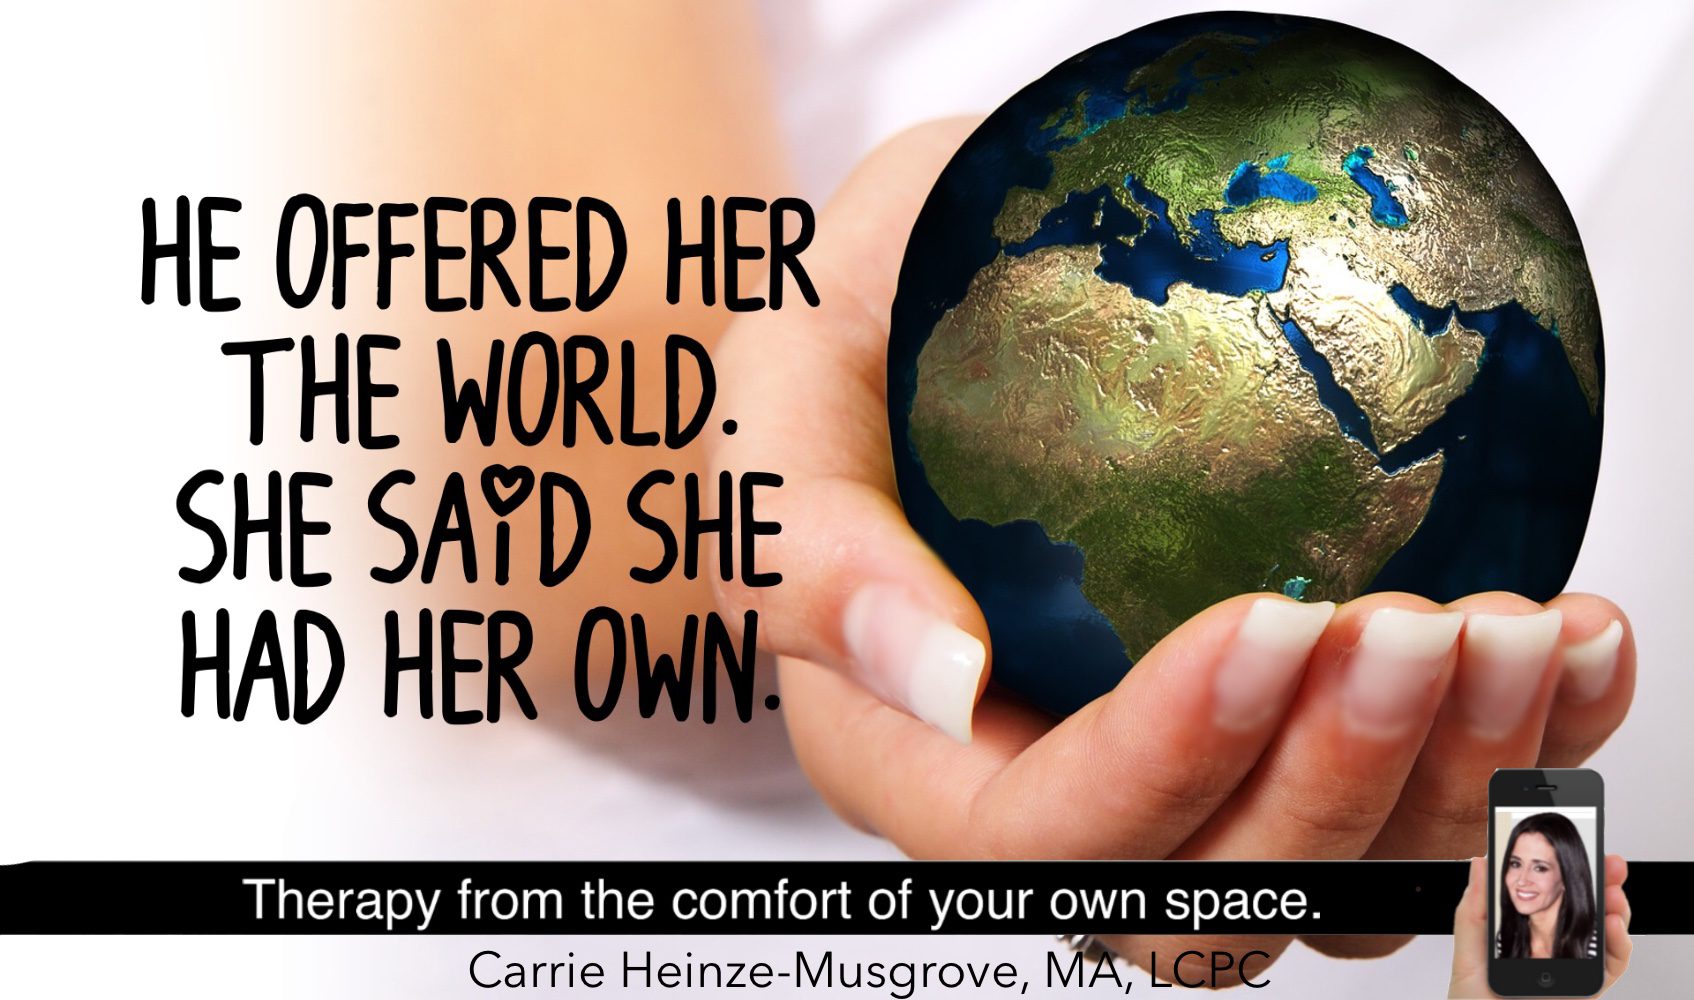 He offered her the world, she said she had her own.